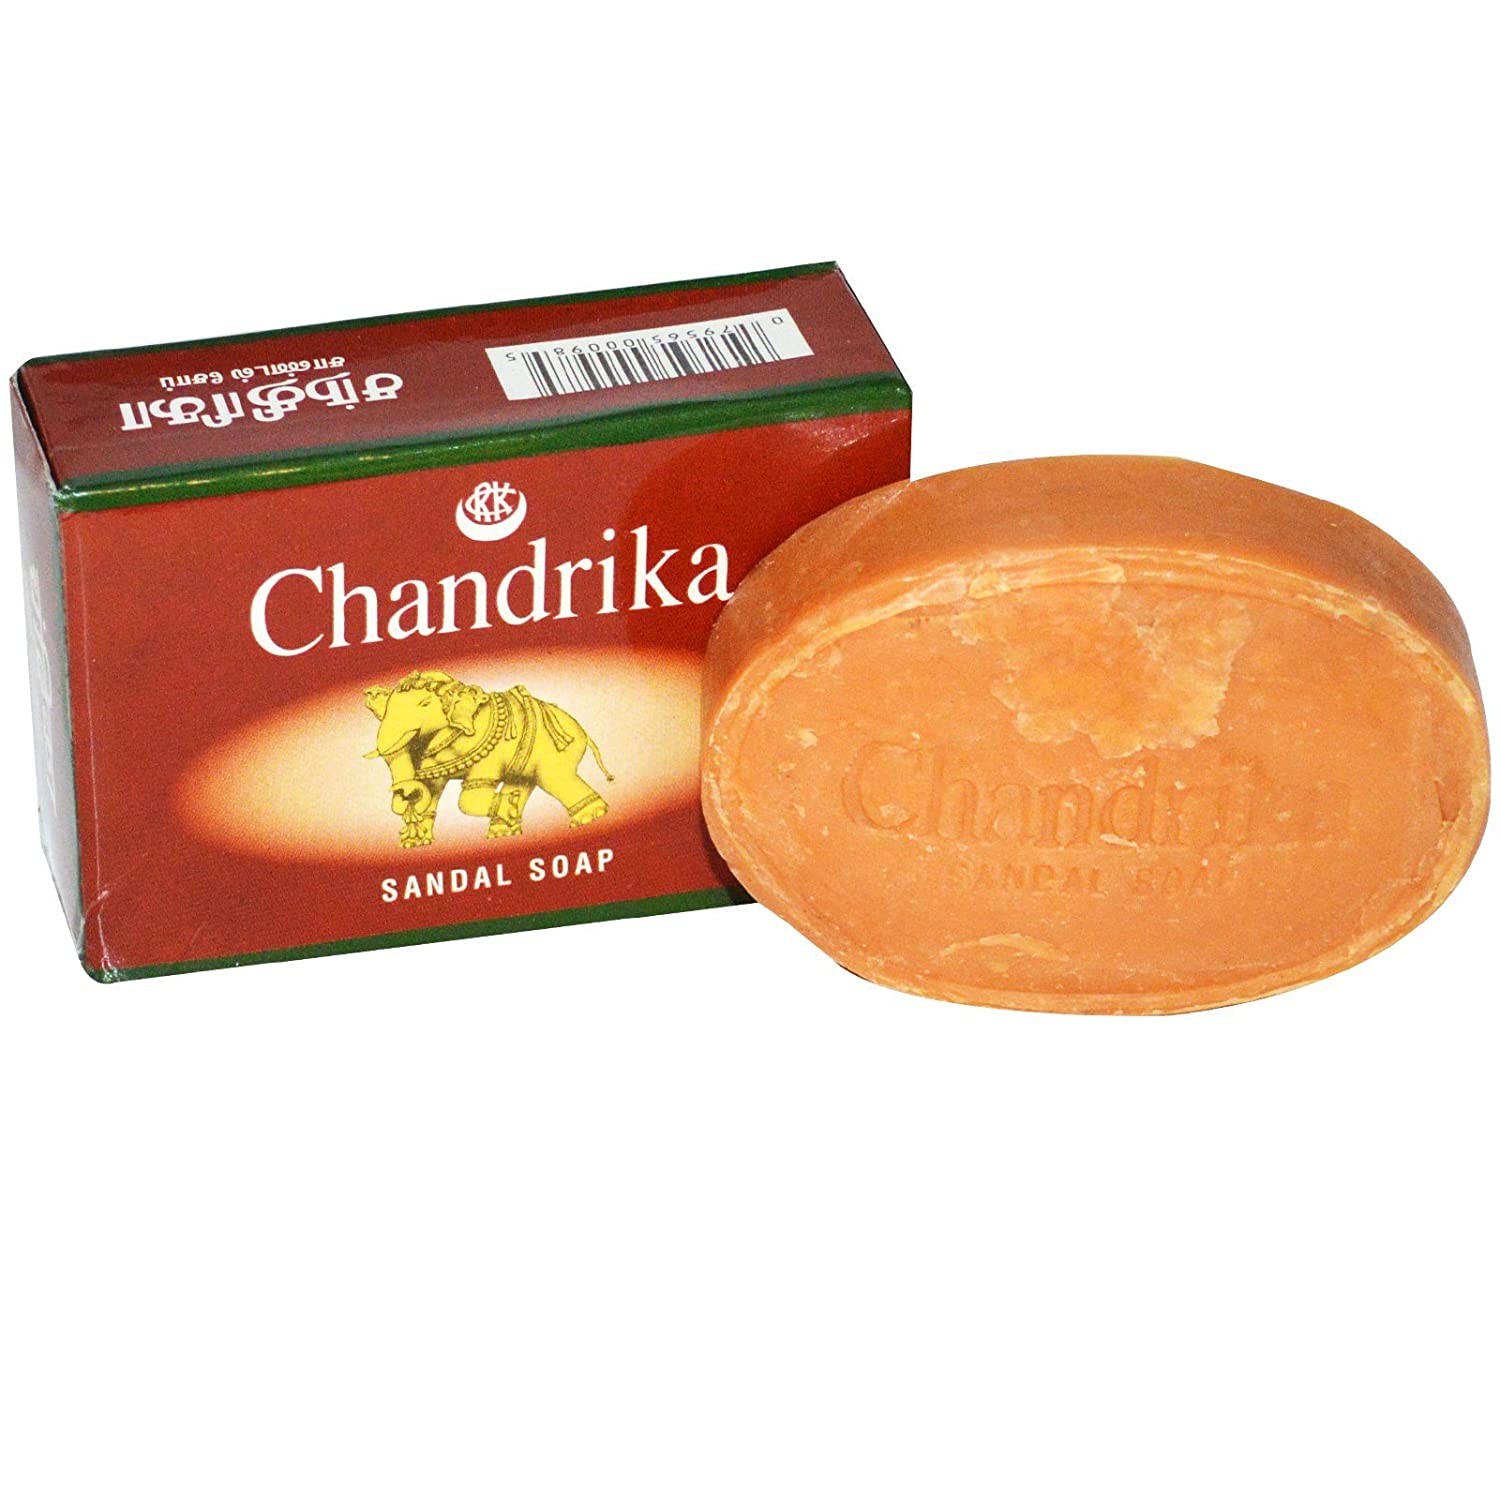 Product Listing Image for Chandrika Sandal Soap